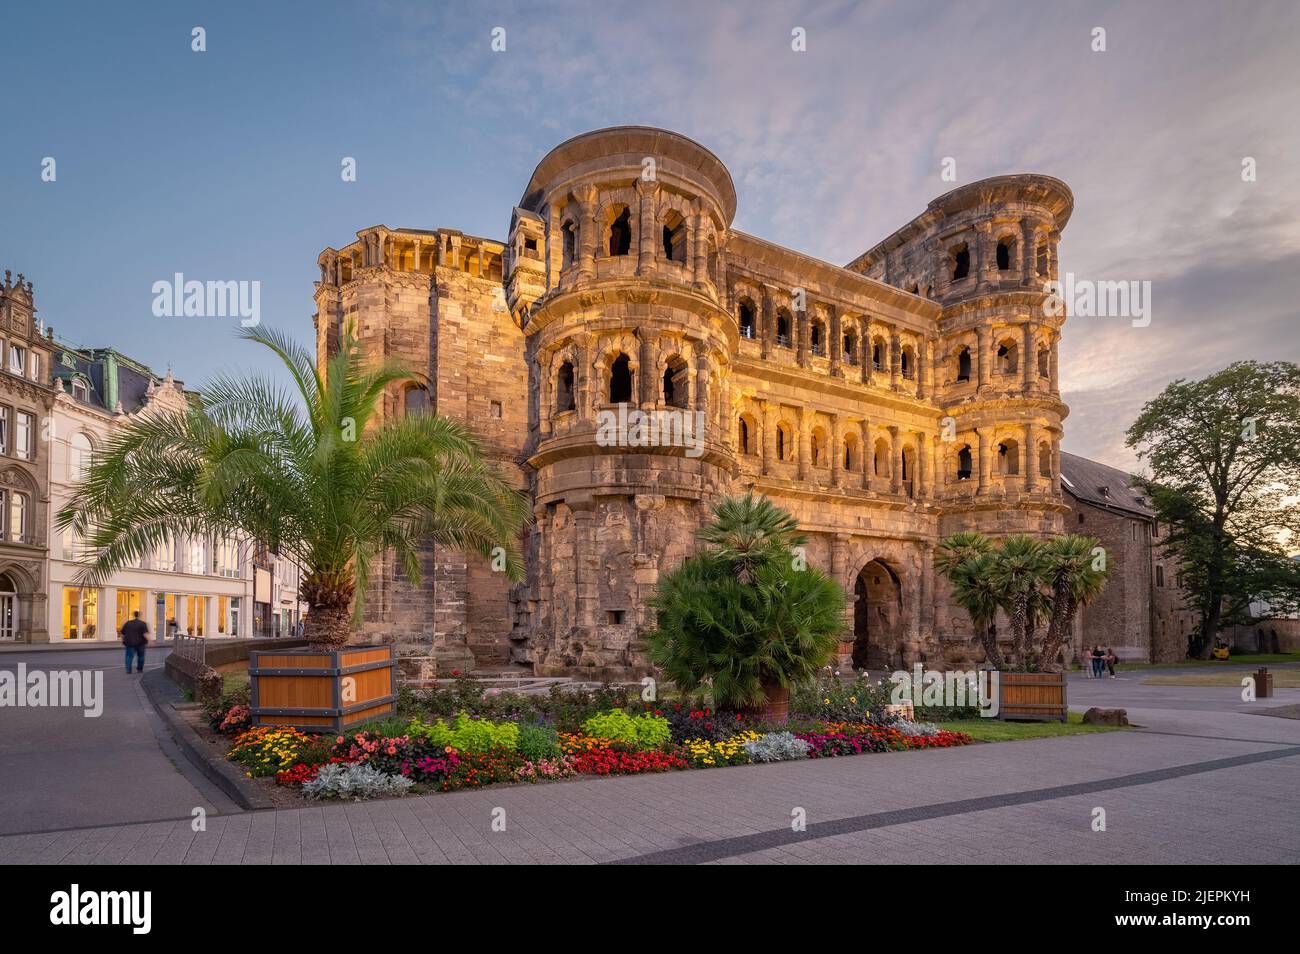 View of the Porta Nigra,at sunset,  a Roman City Gate built after 170 AD and located in Trier, Germany Stock Photo